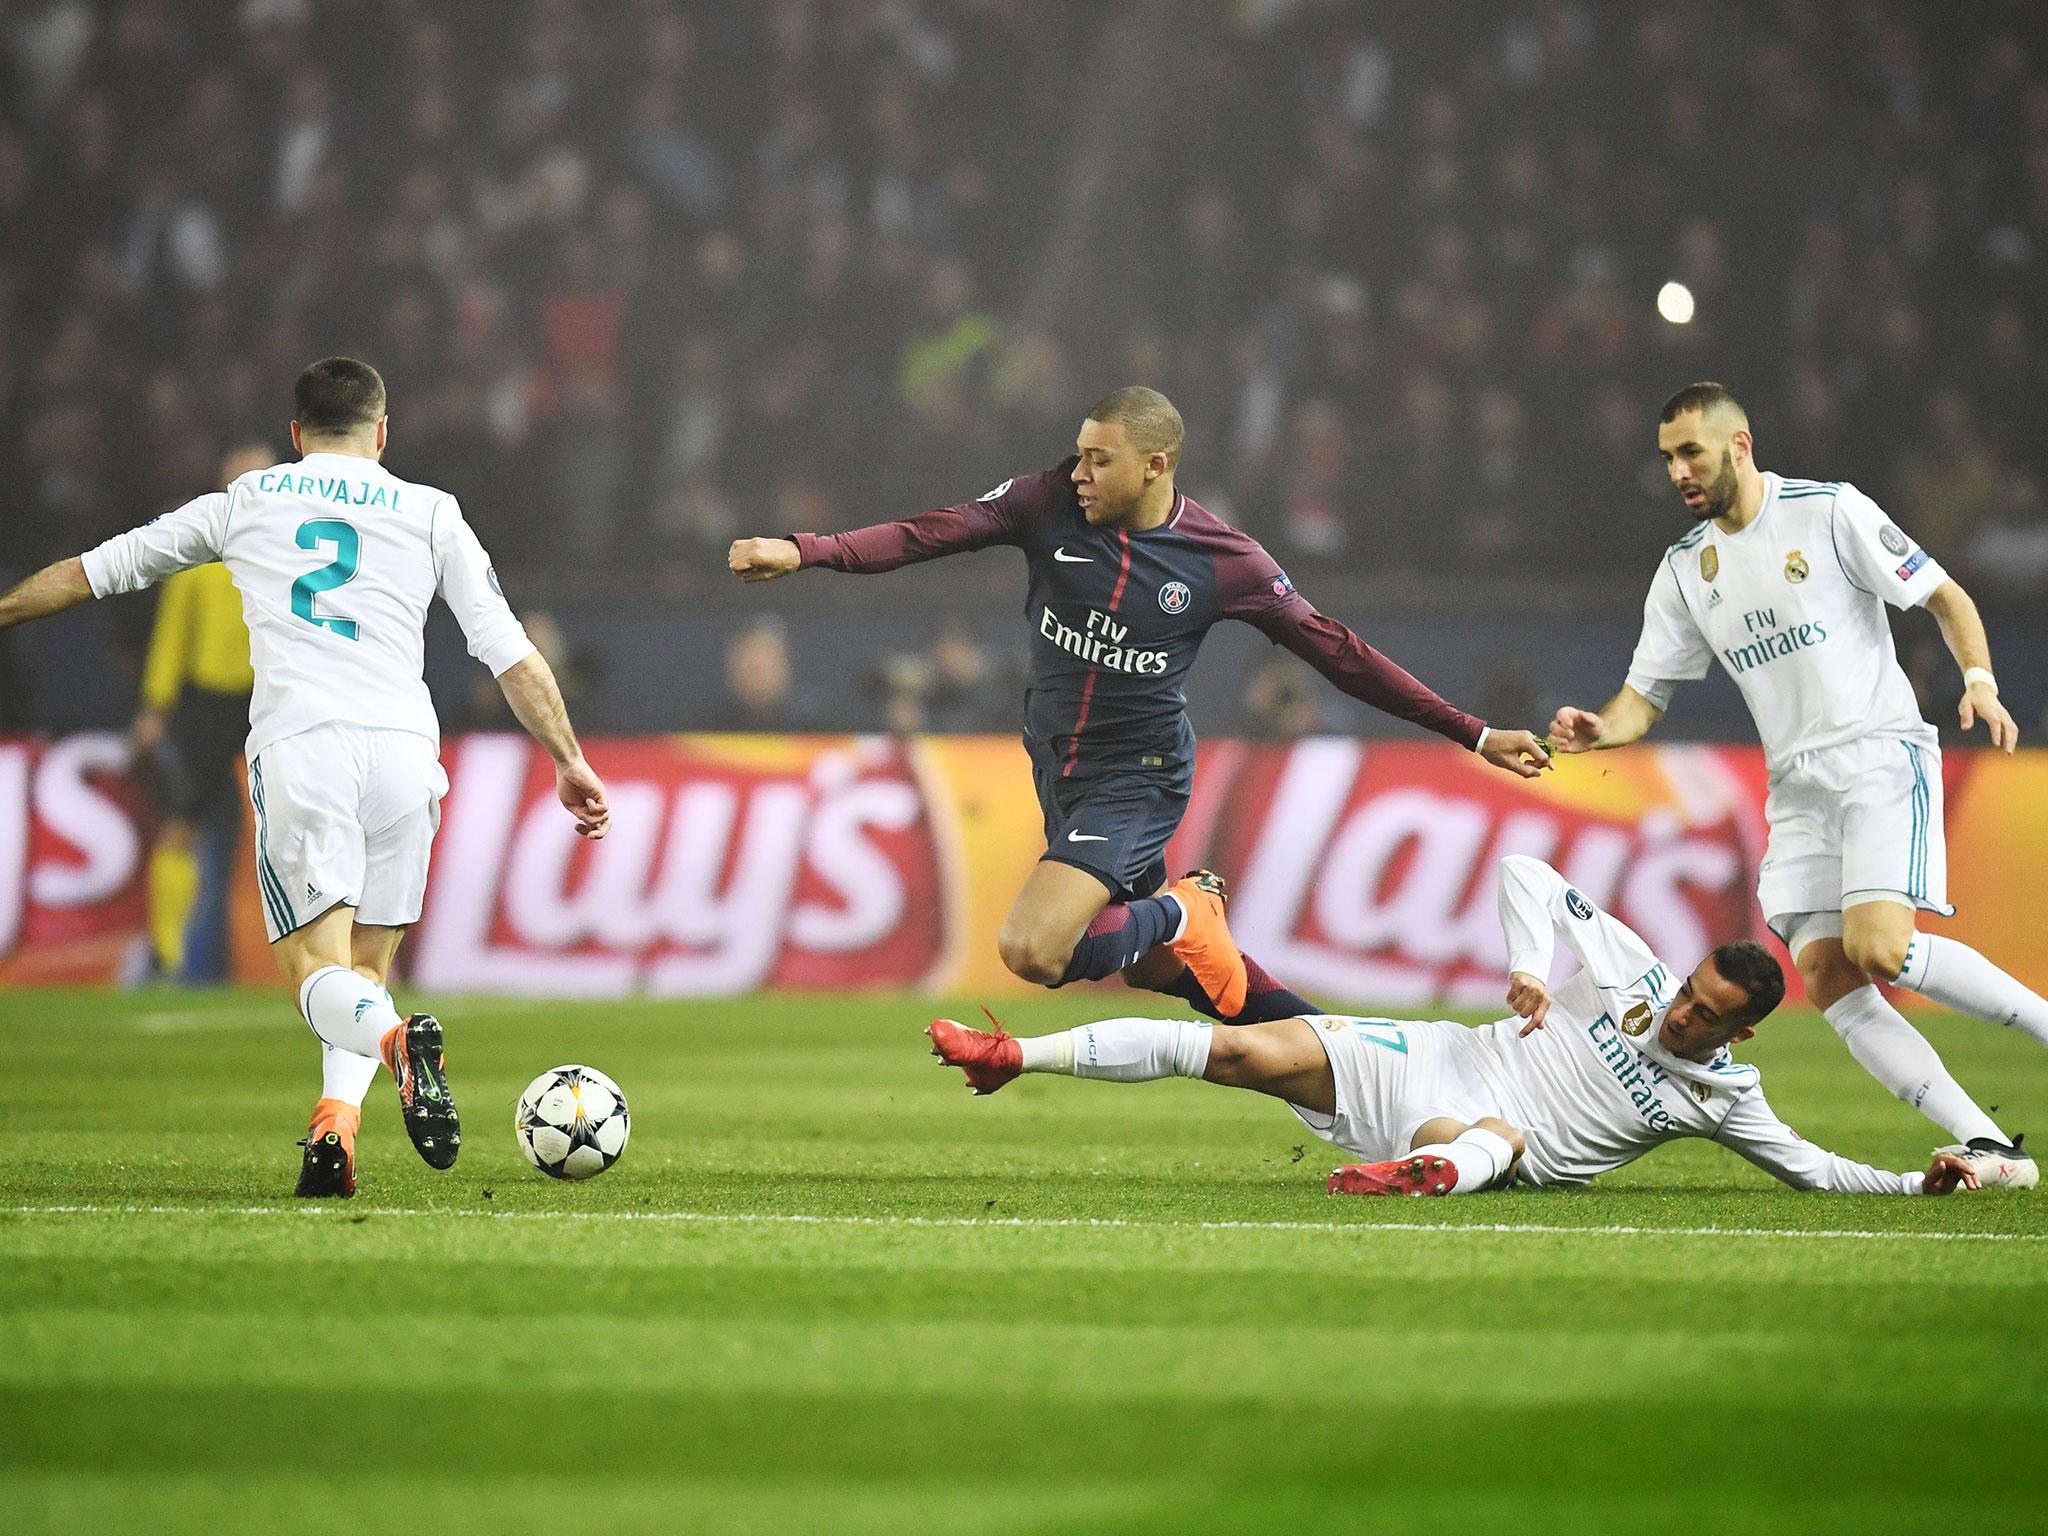 PSG vs Real Madrid, Champions League - as it happened - The Independent